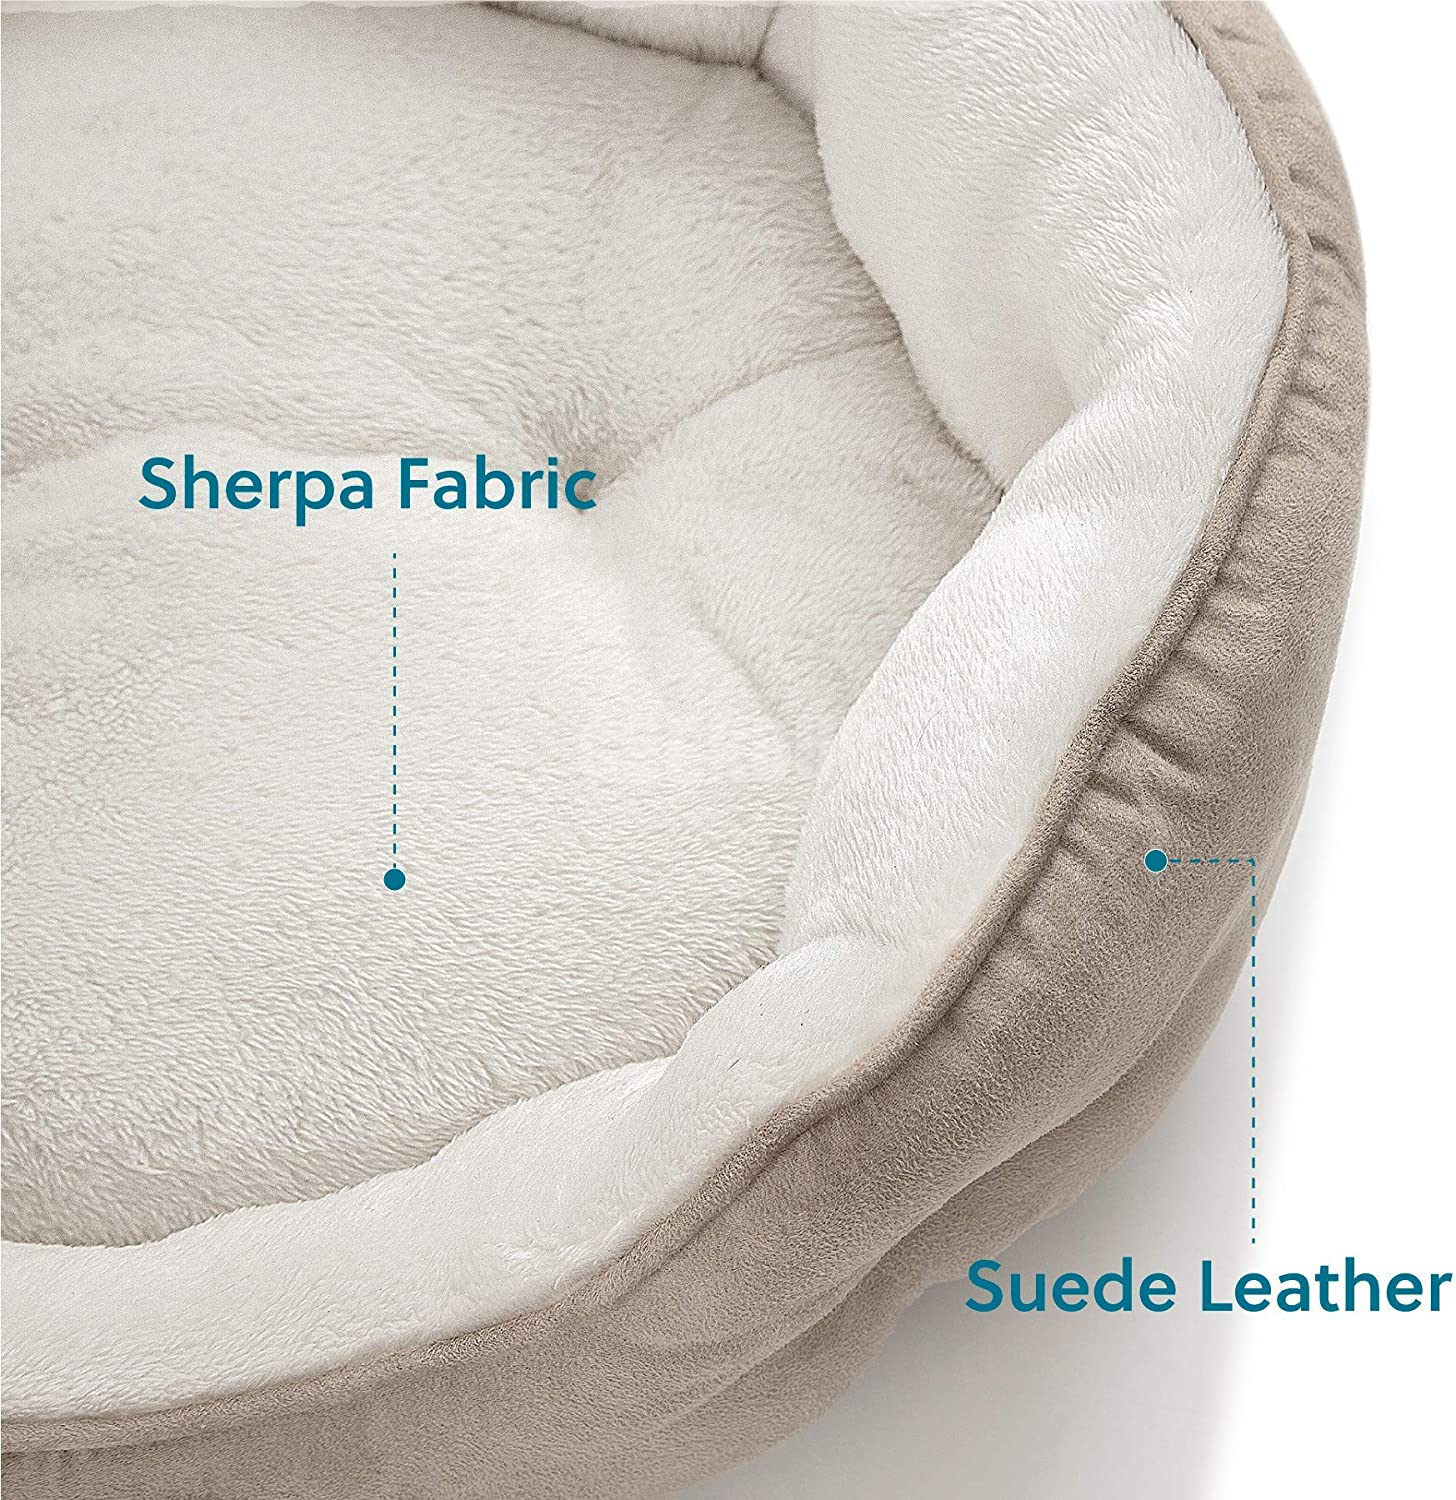 Round Pet Bed for Puppy and Kitten with Slip-Resistant Bottom GRDDB-4